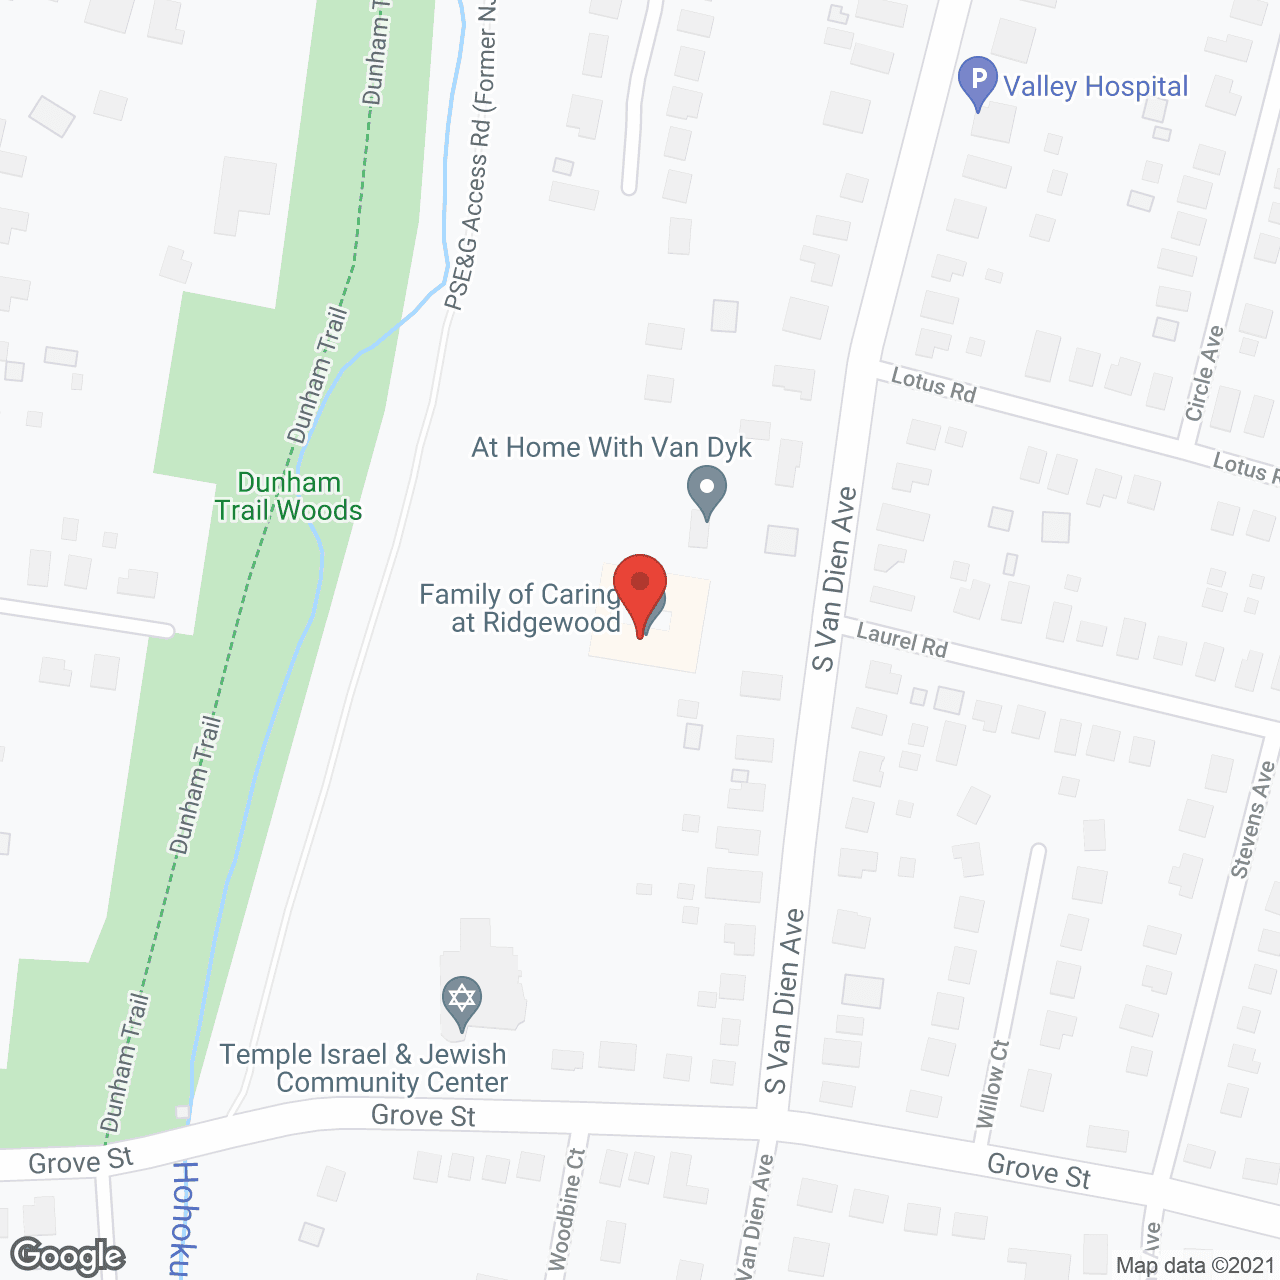 Family of Caring at Ridgewood in google map